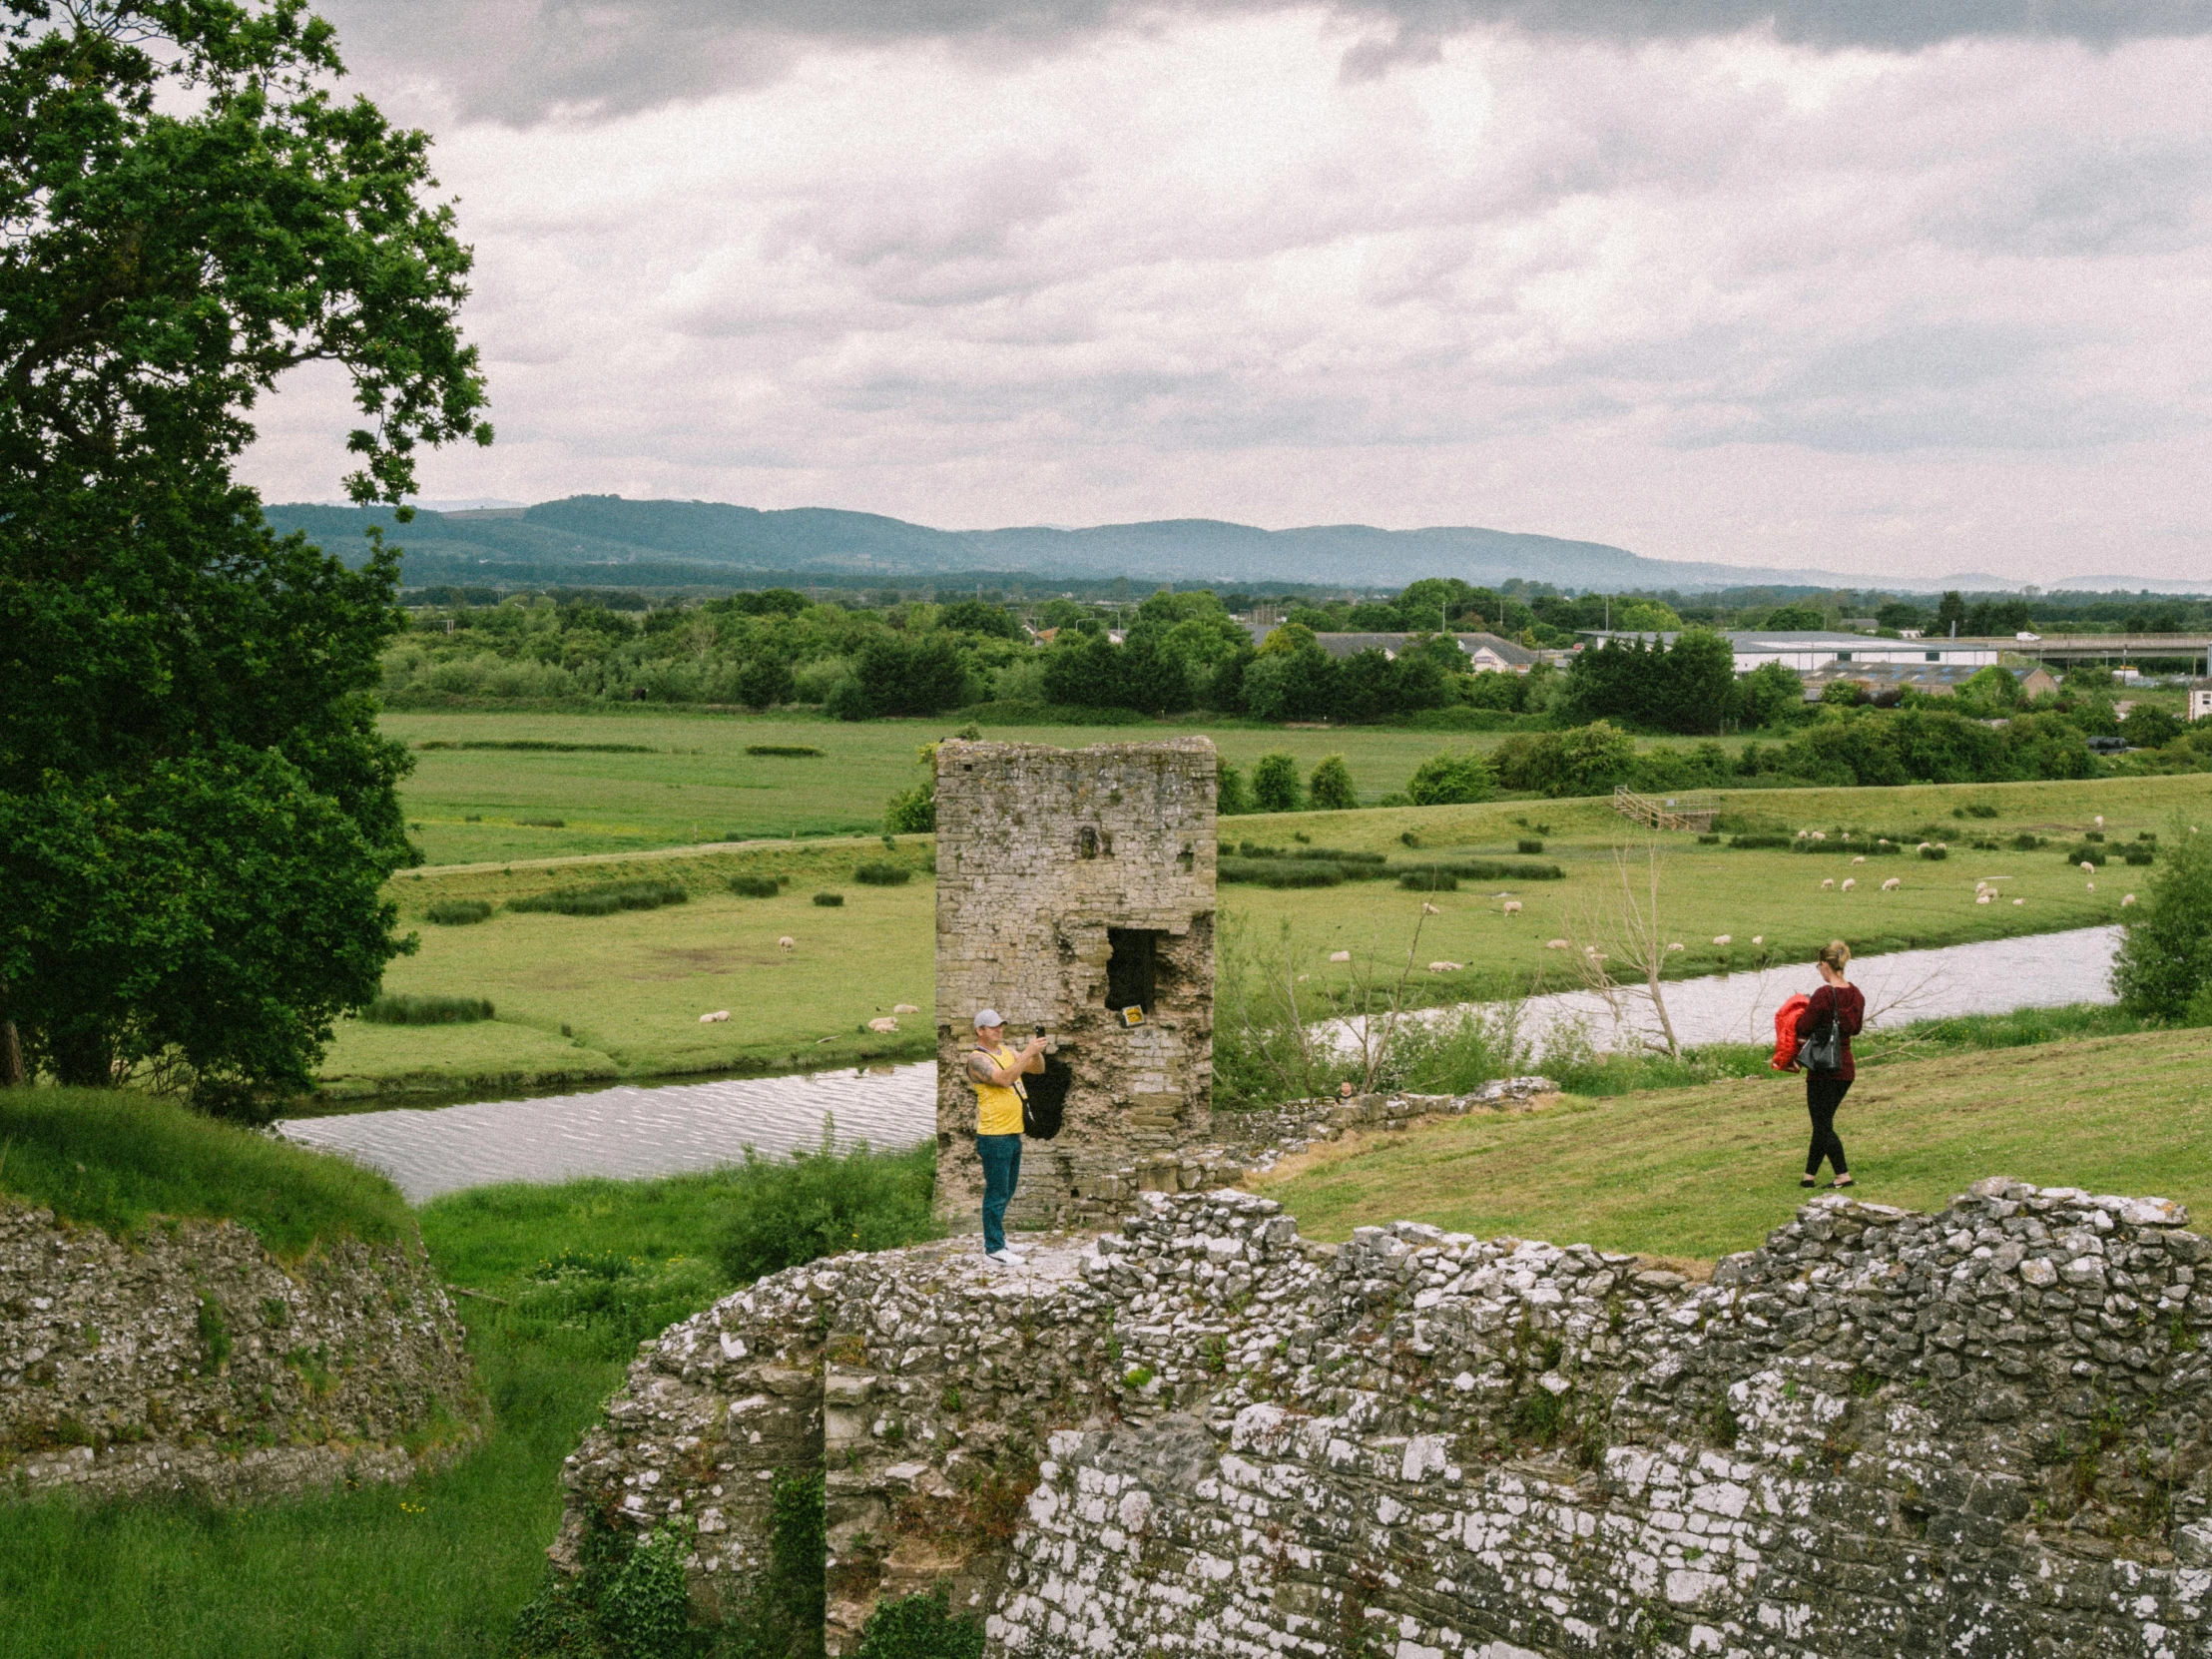 two people standing next to a stone wall overlooking a field